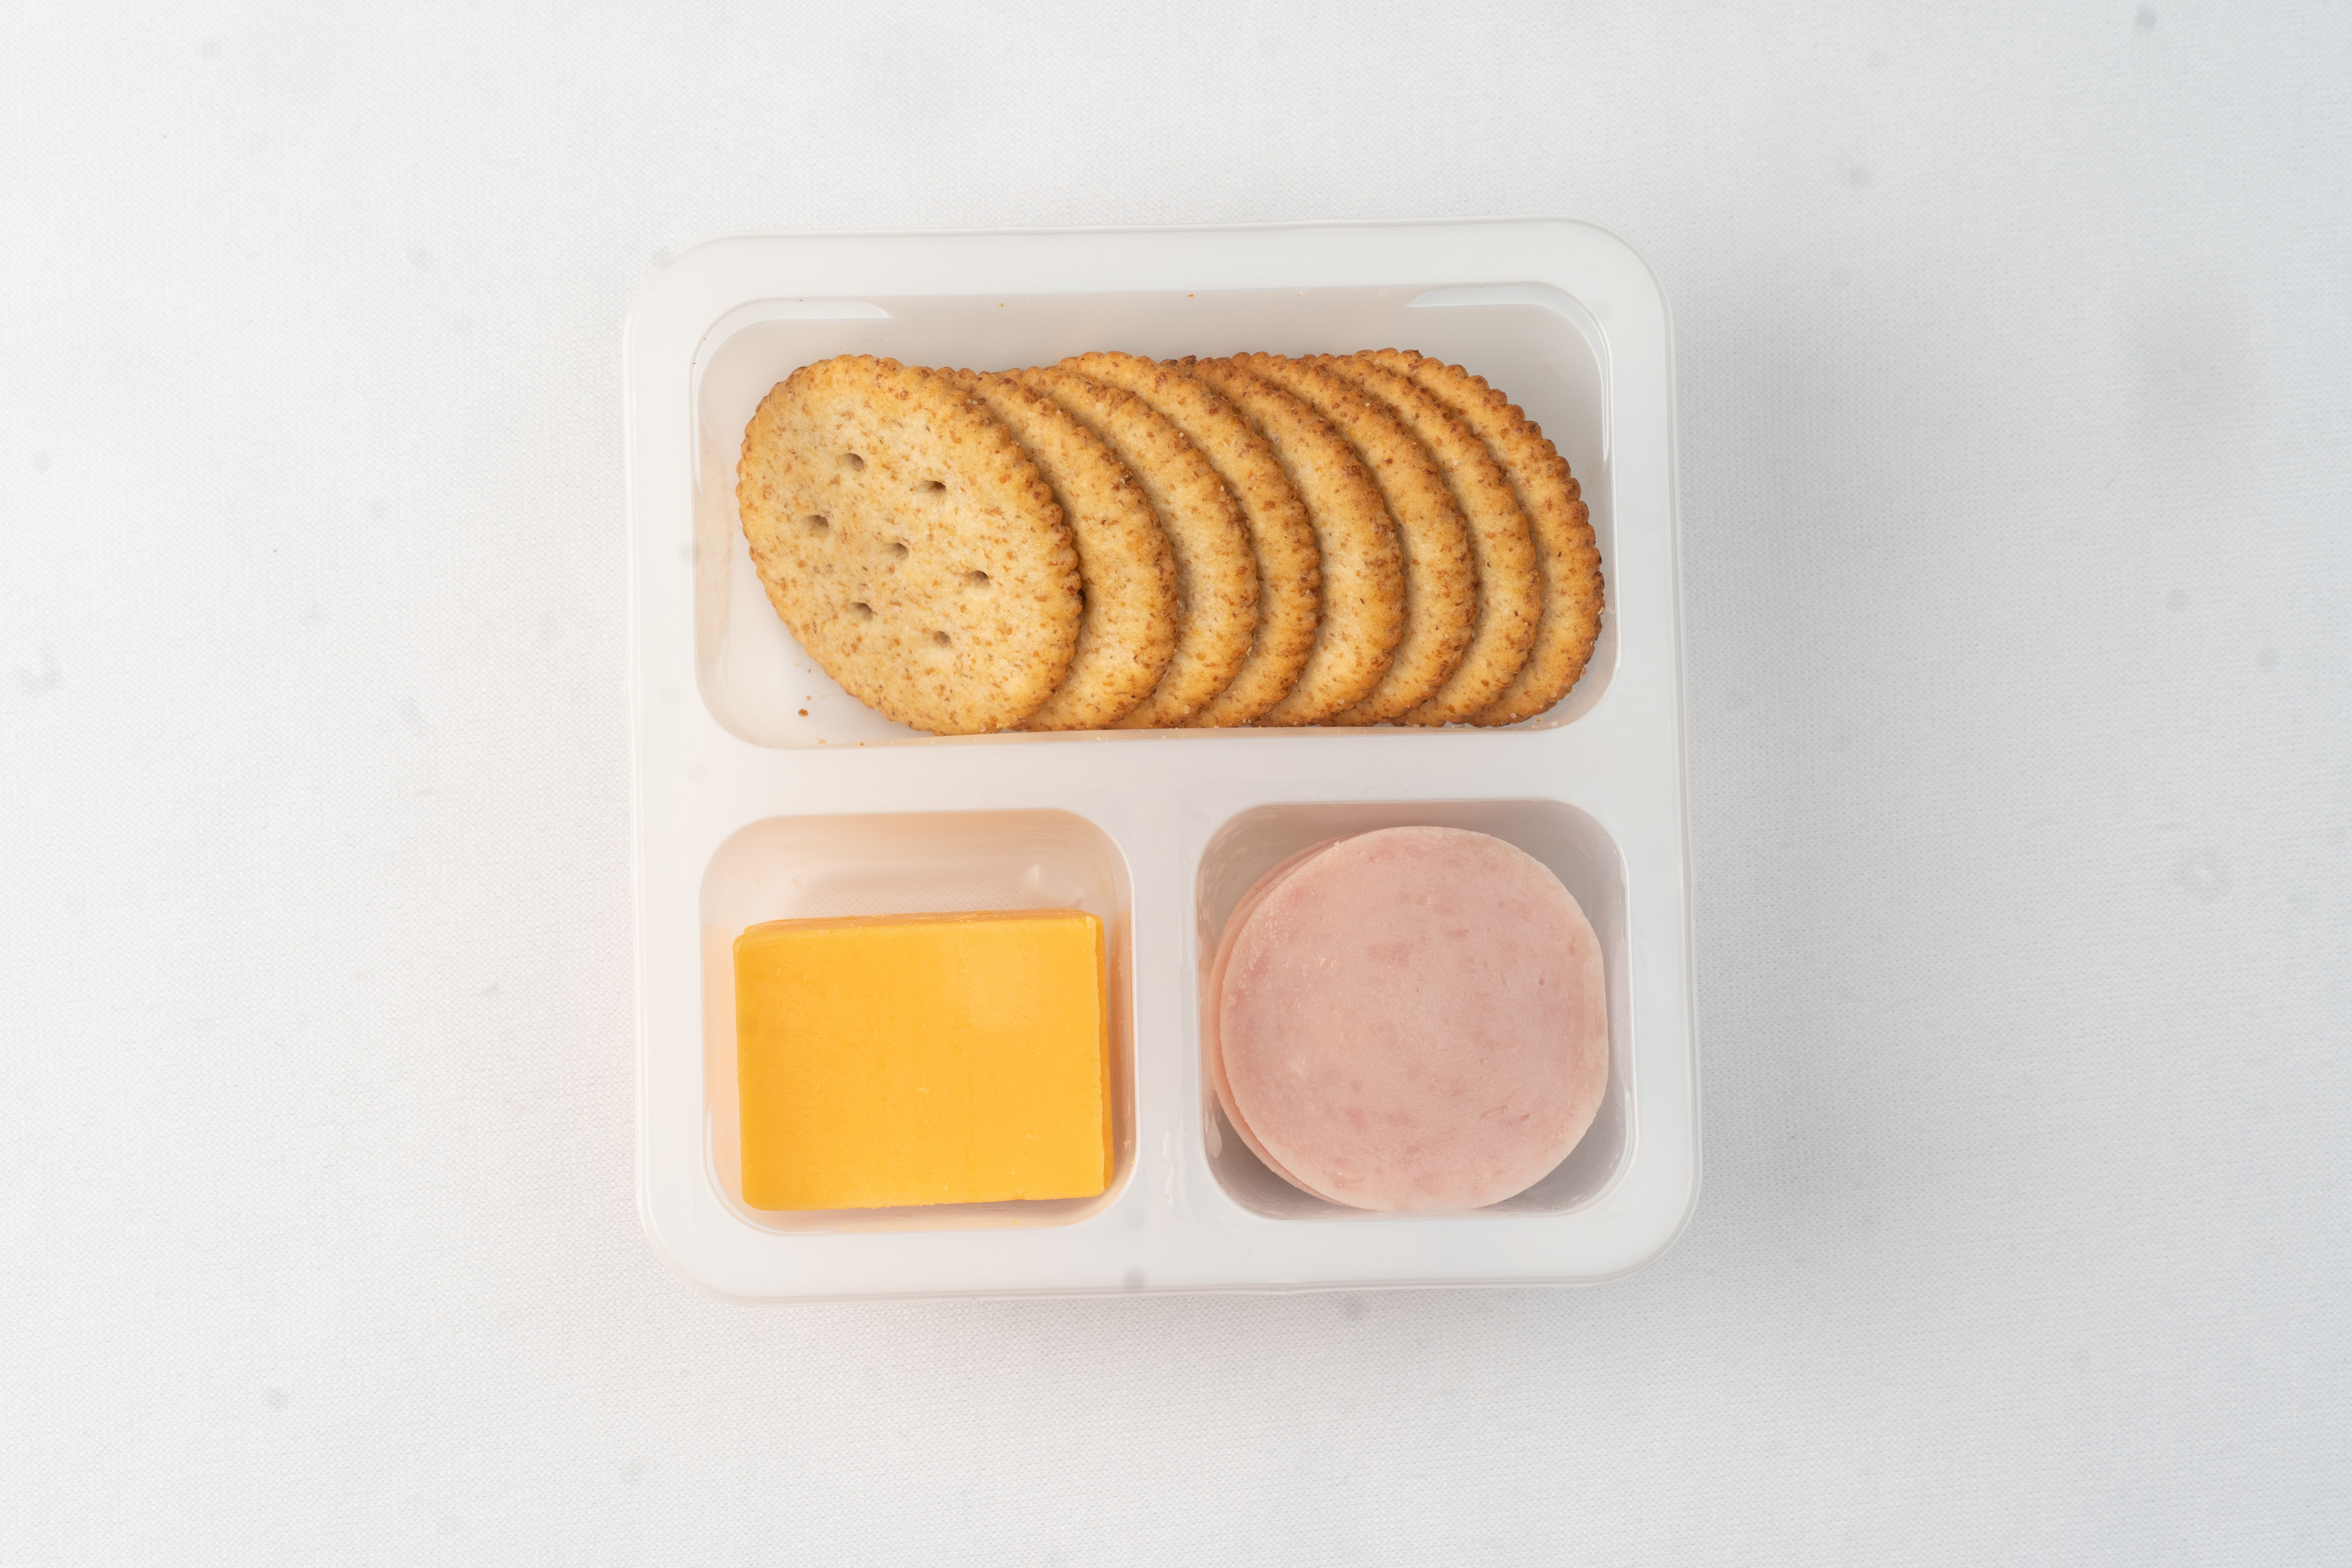 Closeup of a Lunchables meal